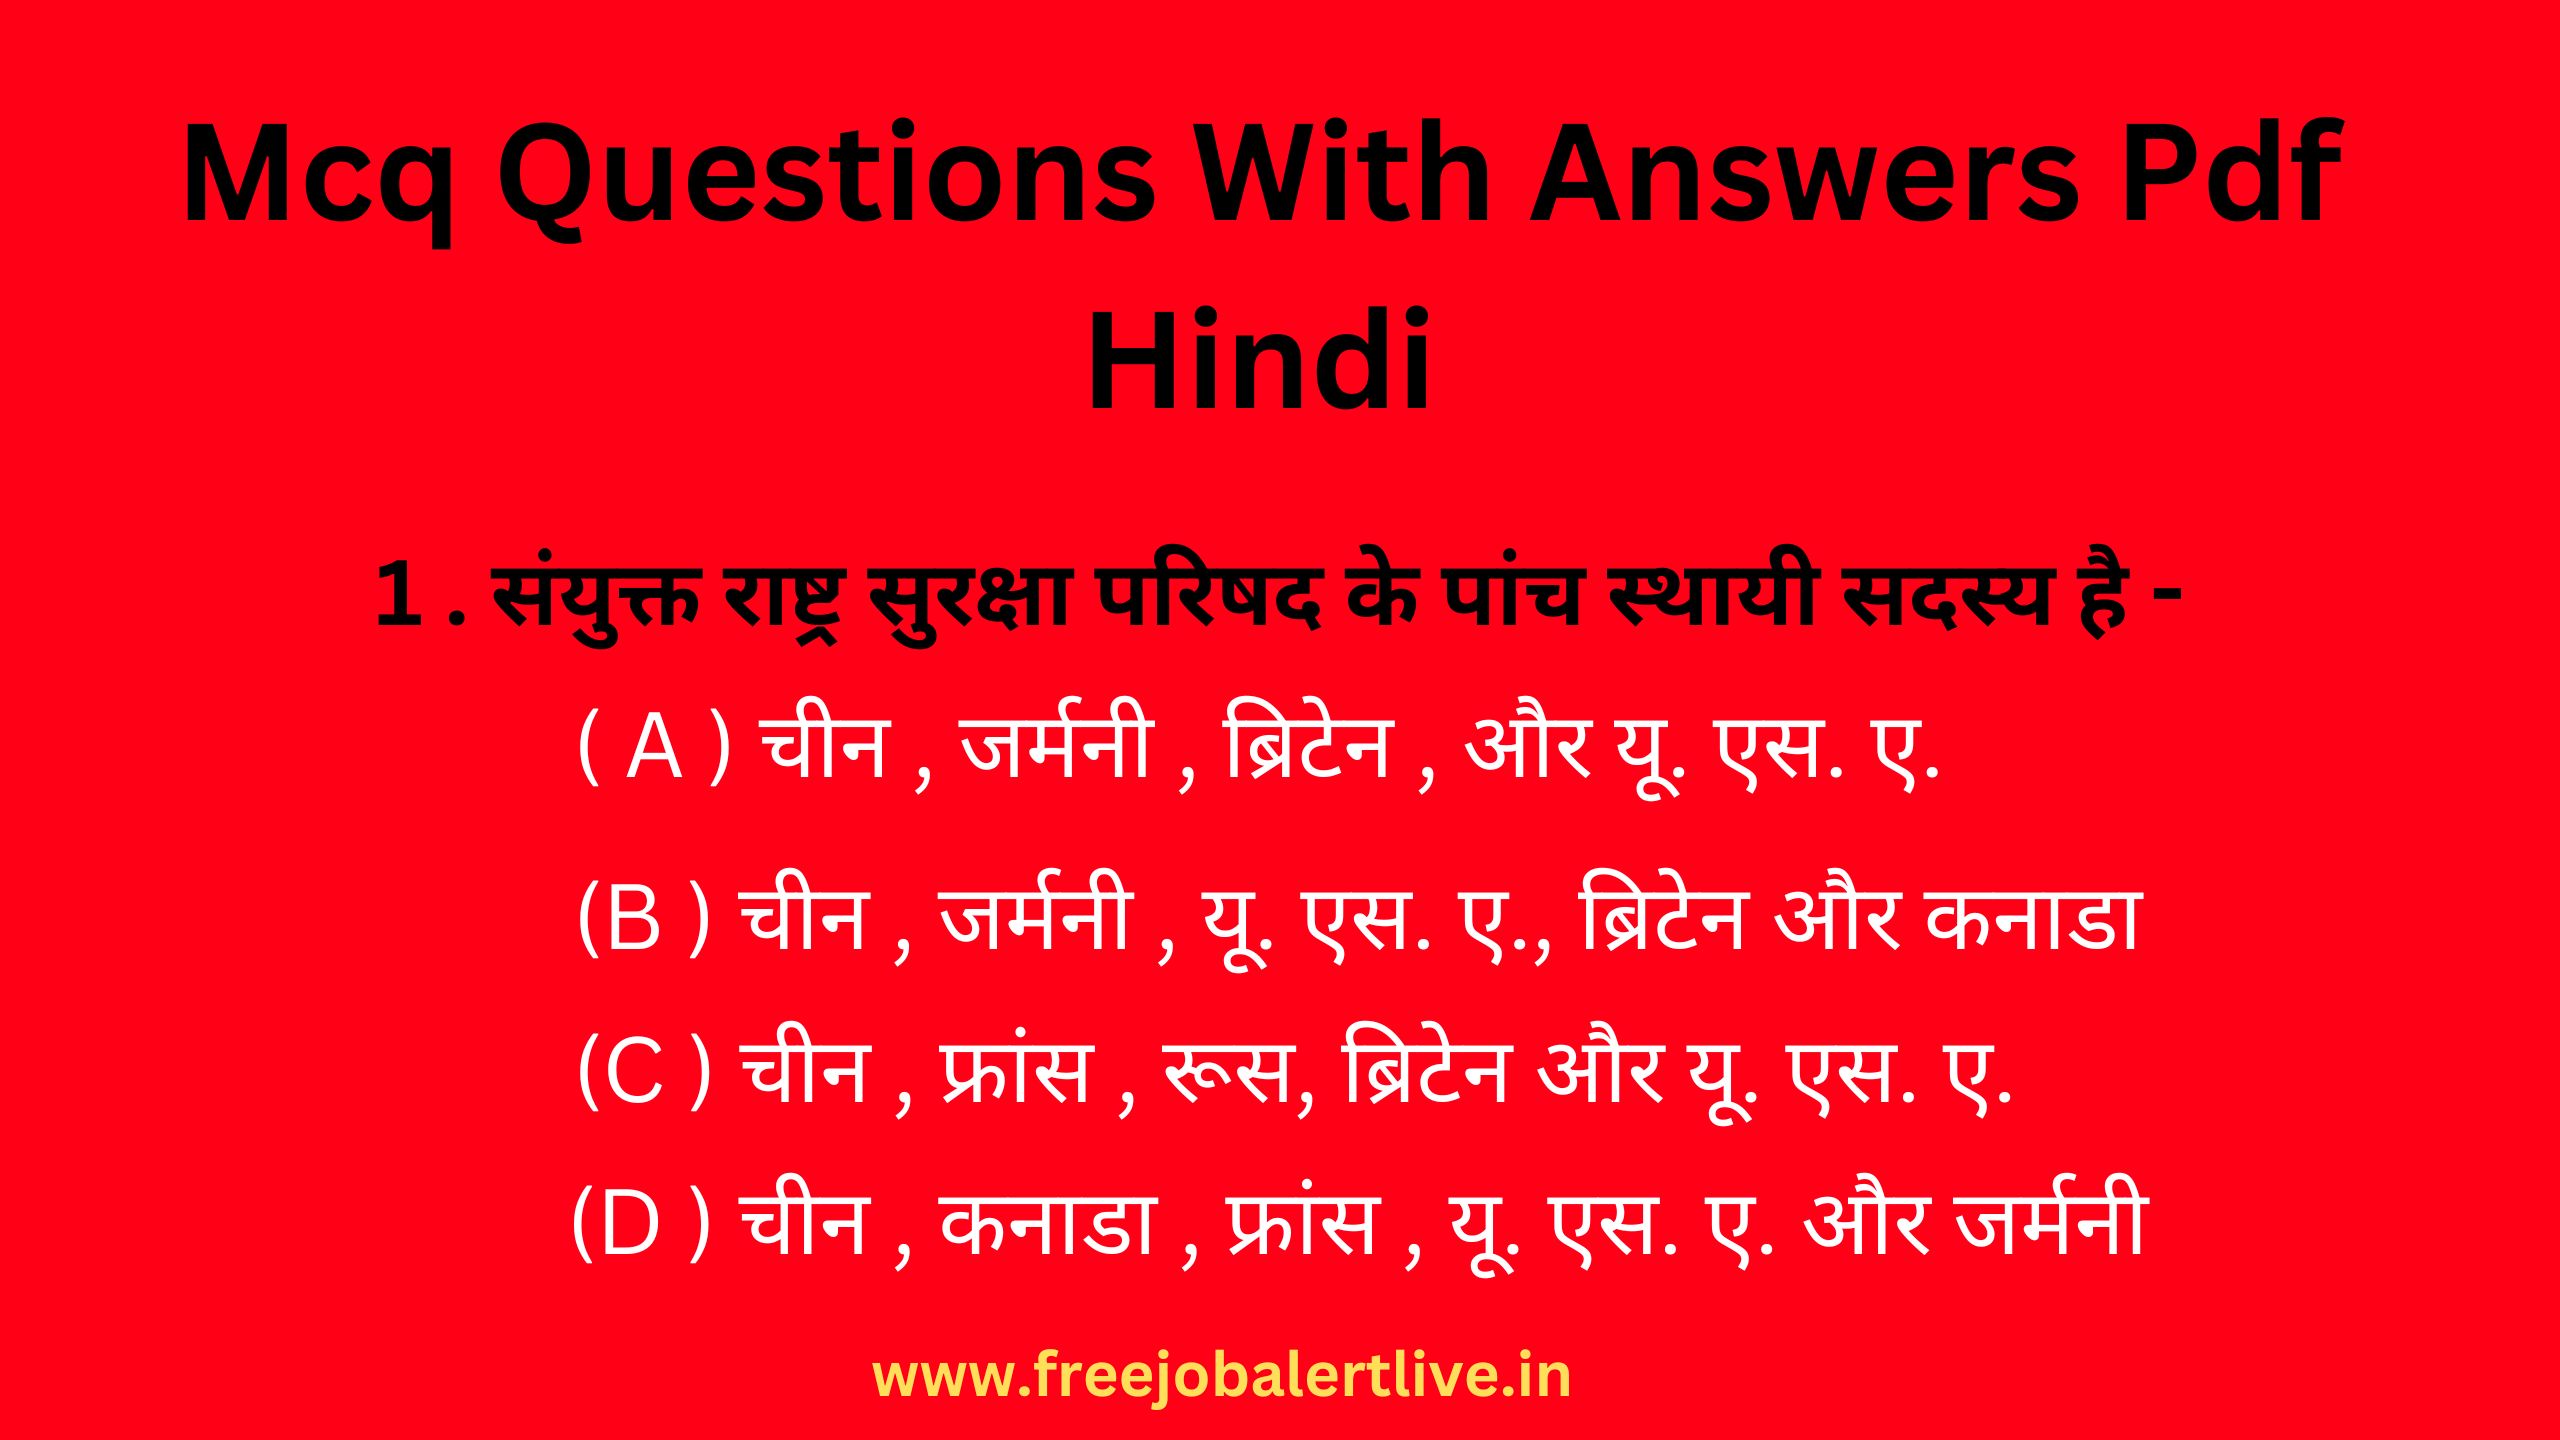 Mcq Questions With Answers Pdf Hindi